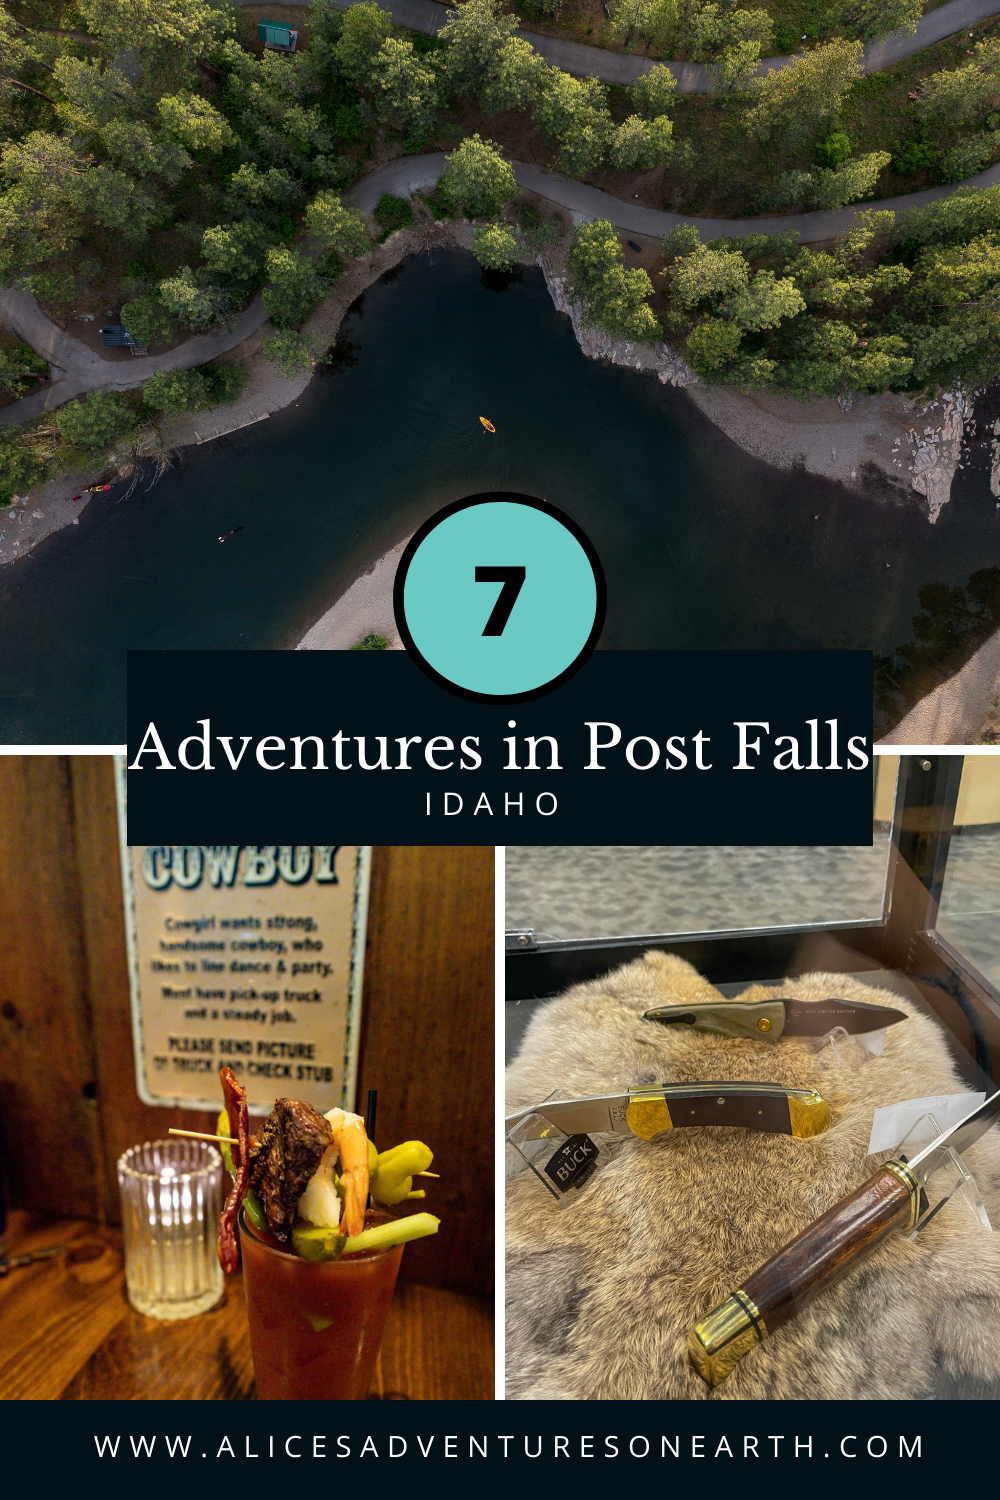 7 of the best adventures to have in Post Falls Idaho Post Falls Idaho Travel Guide: biking, hiking, rock climbing and dining guide to the best town in North Idaho #idaho